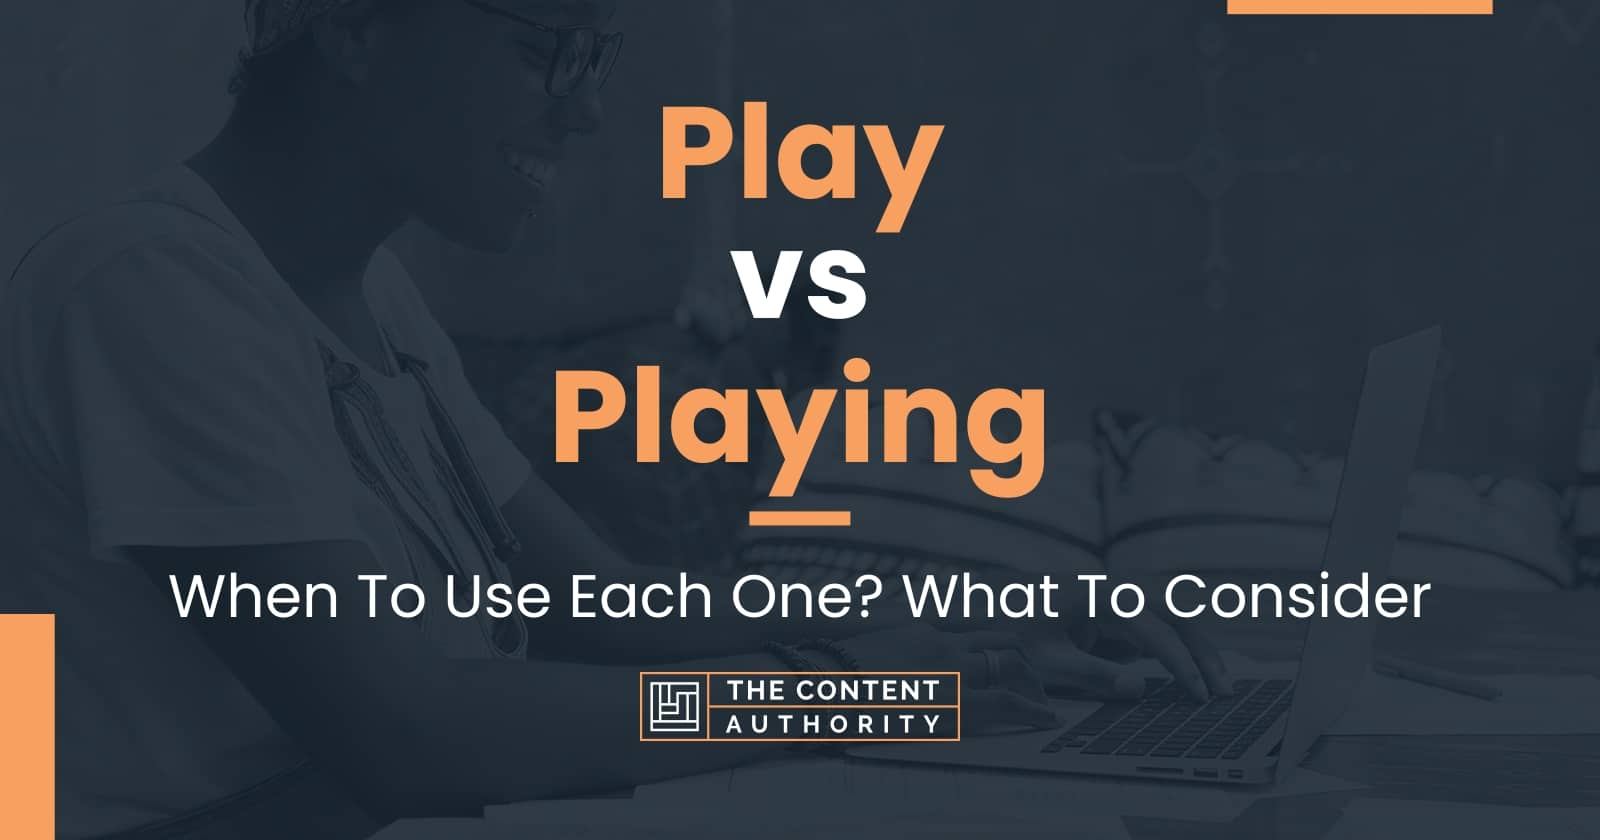 Play vs Playing: When To Use Each One? What To Consider